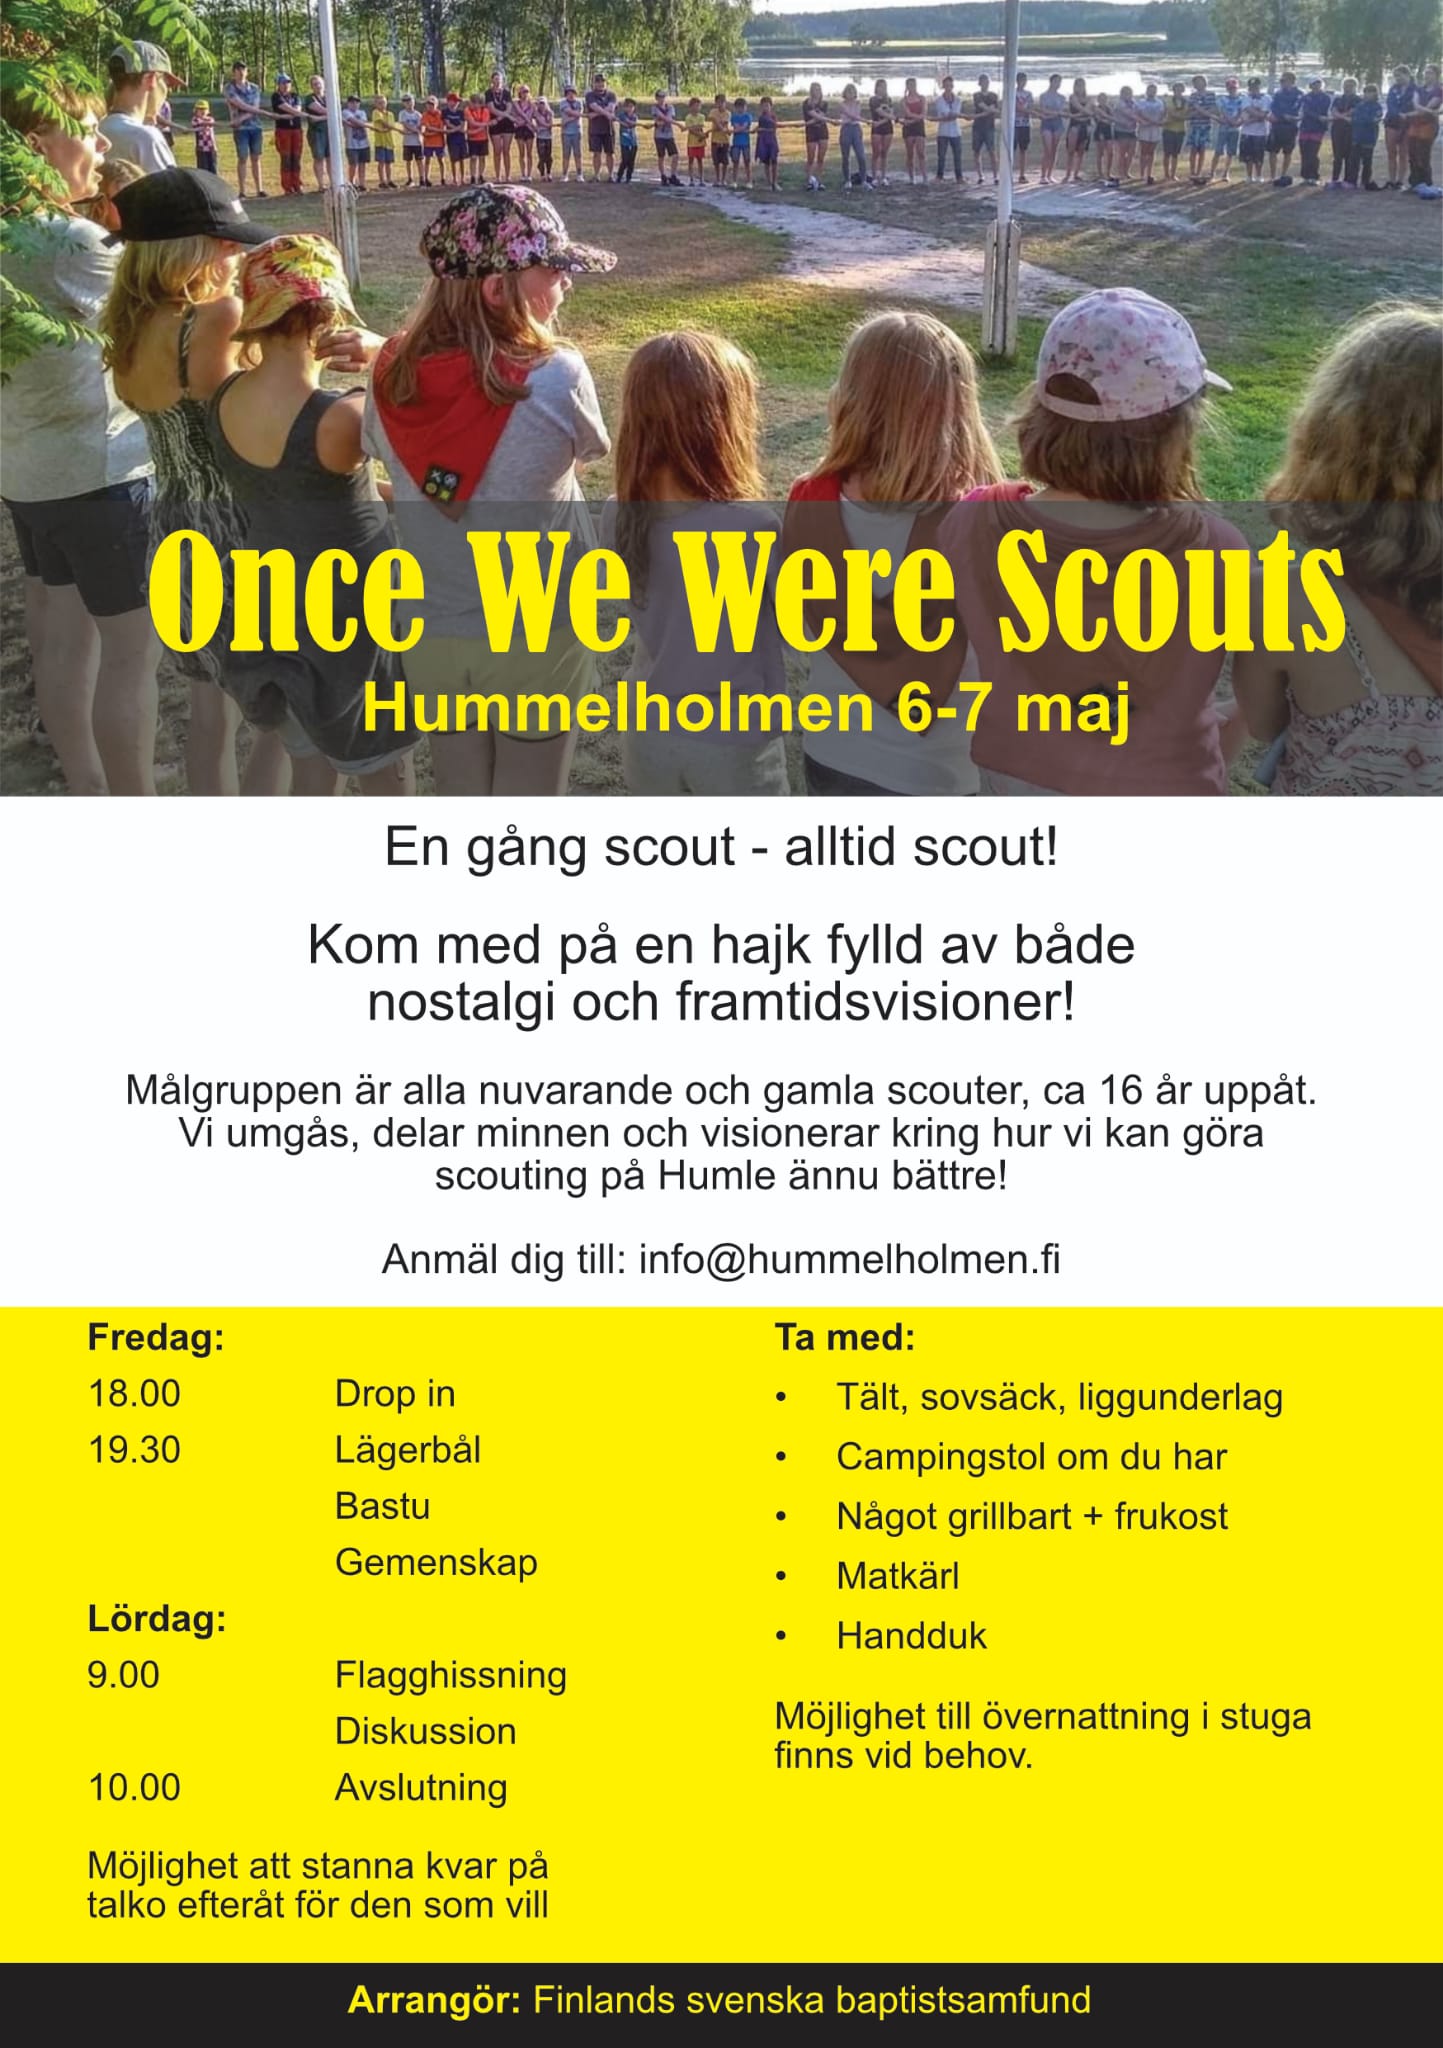 Once we were scouts